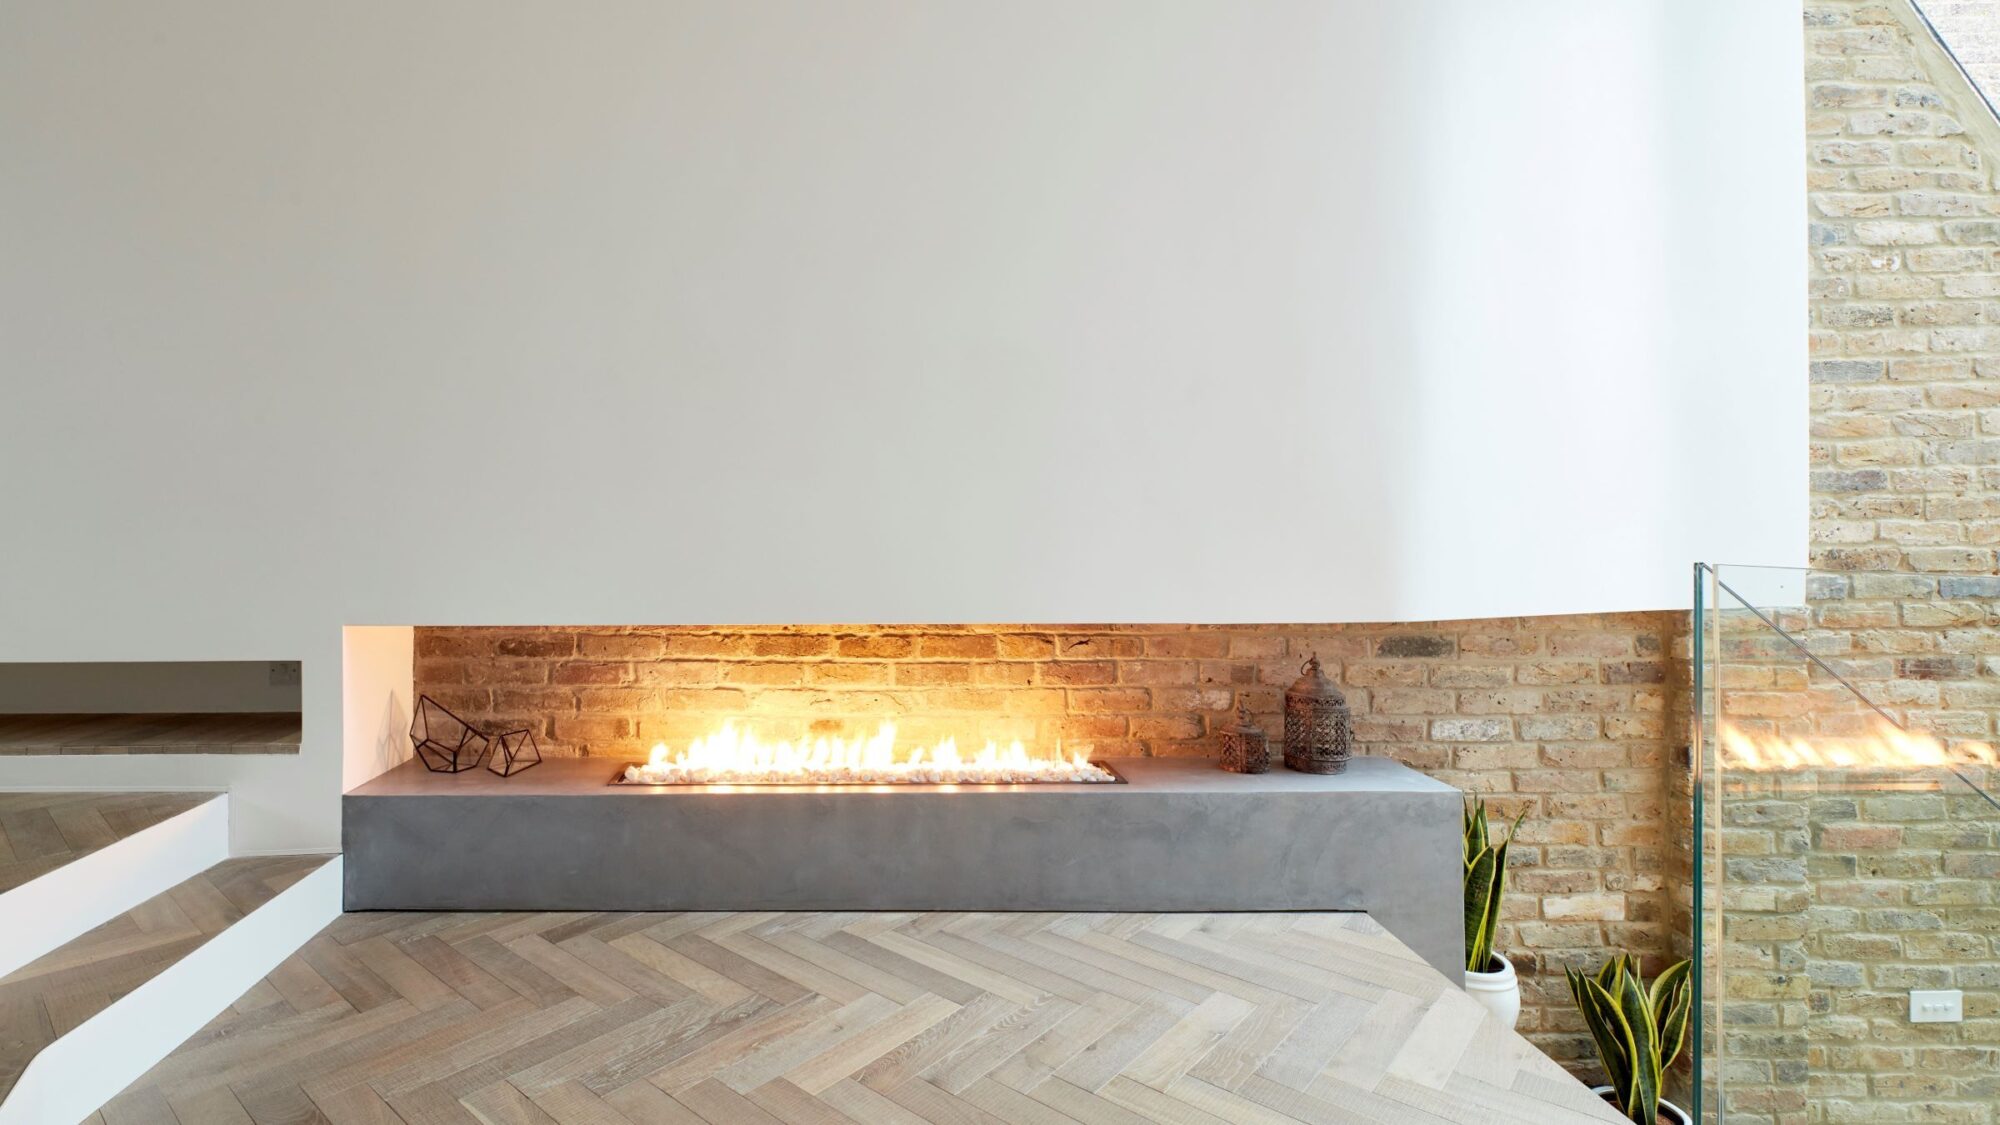 Tate bute herringbone floor with fire place by scenario architecture image by M Clayton3